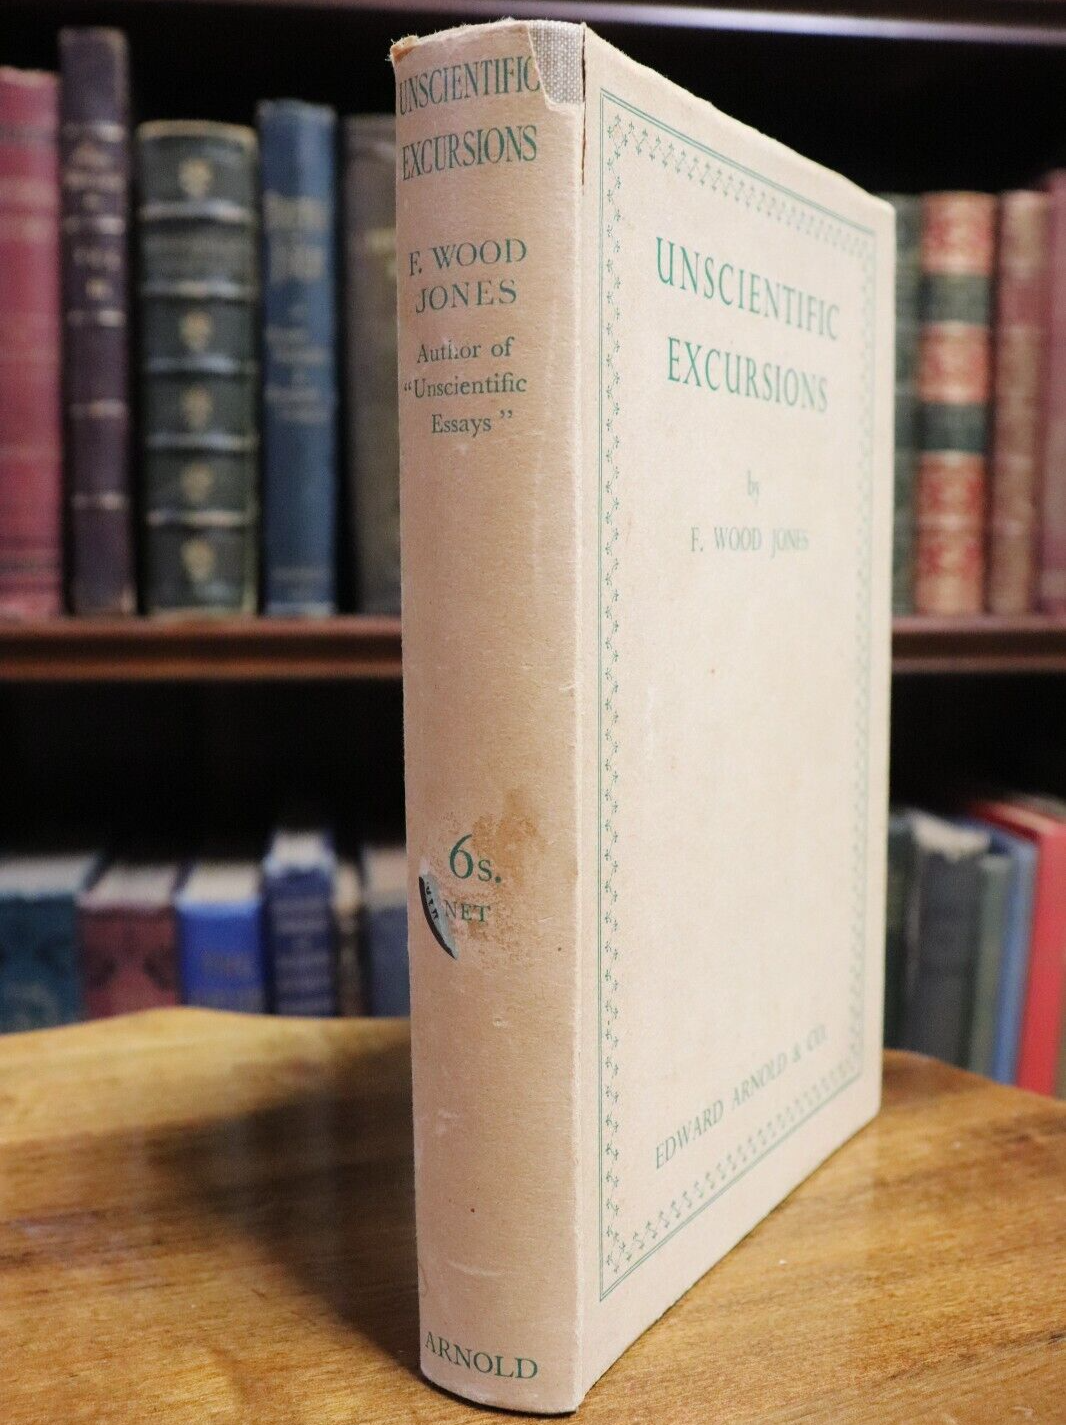 1934 Unscientific Excursions by Frederic Wood Jones 1st Edition Science Book